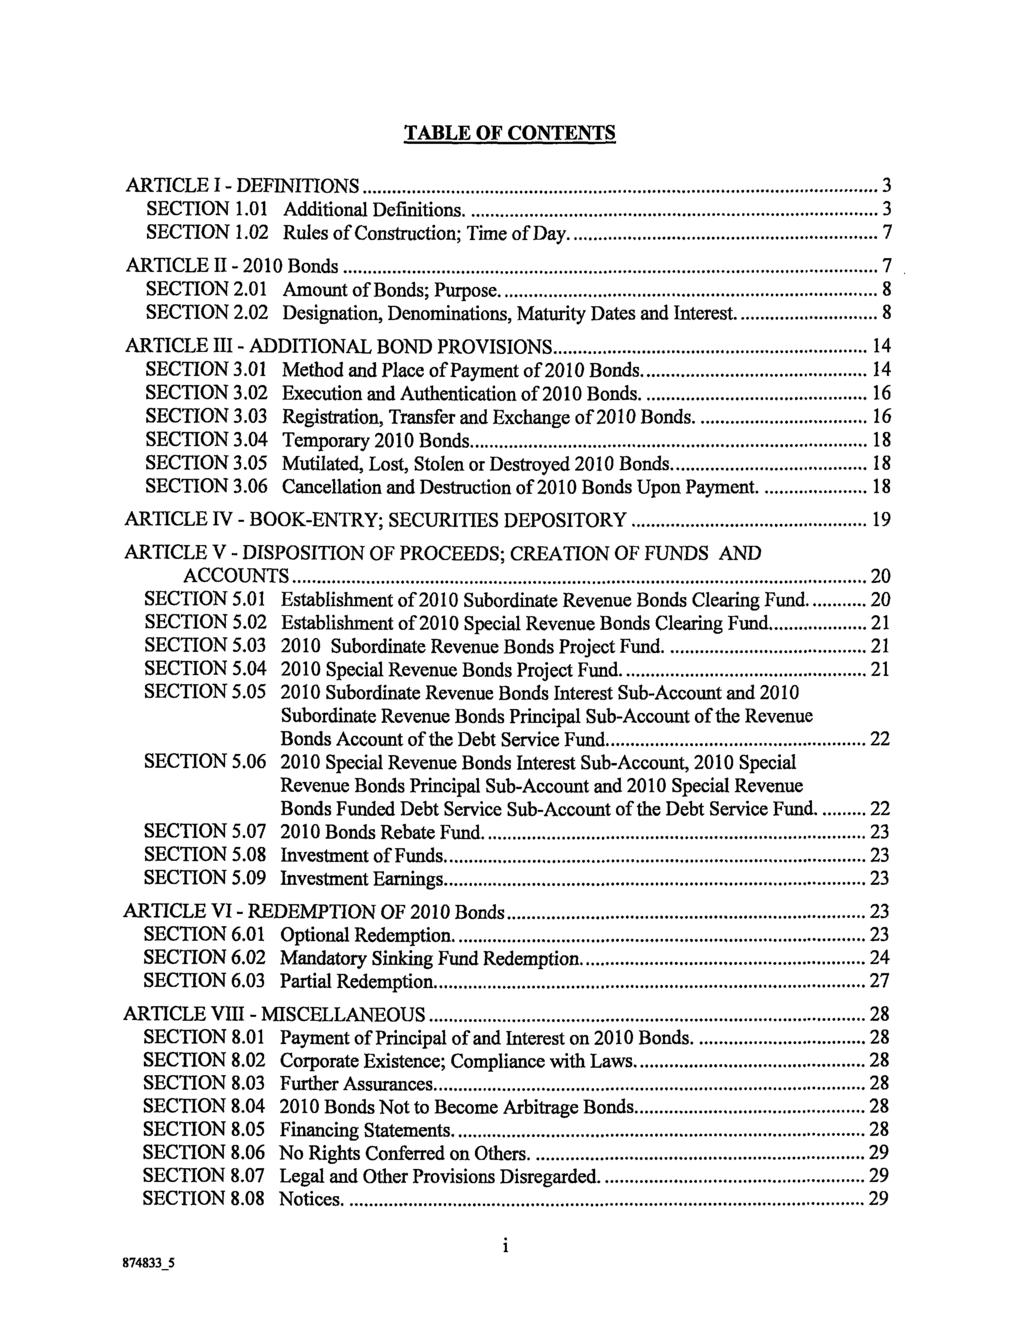 TABLE OF CONTENTS ARTICLE I- DEFINITIONS... 3 SECTION 1.01 Additional Definitions... 3 SECTION 1.02 Rules of Construction; Time of Day... 7 ARTICLE II- 2010 Bonds... 7 SECTION 2.